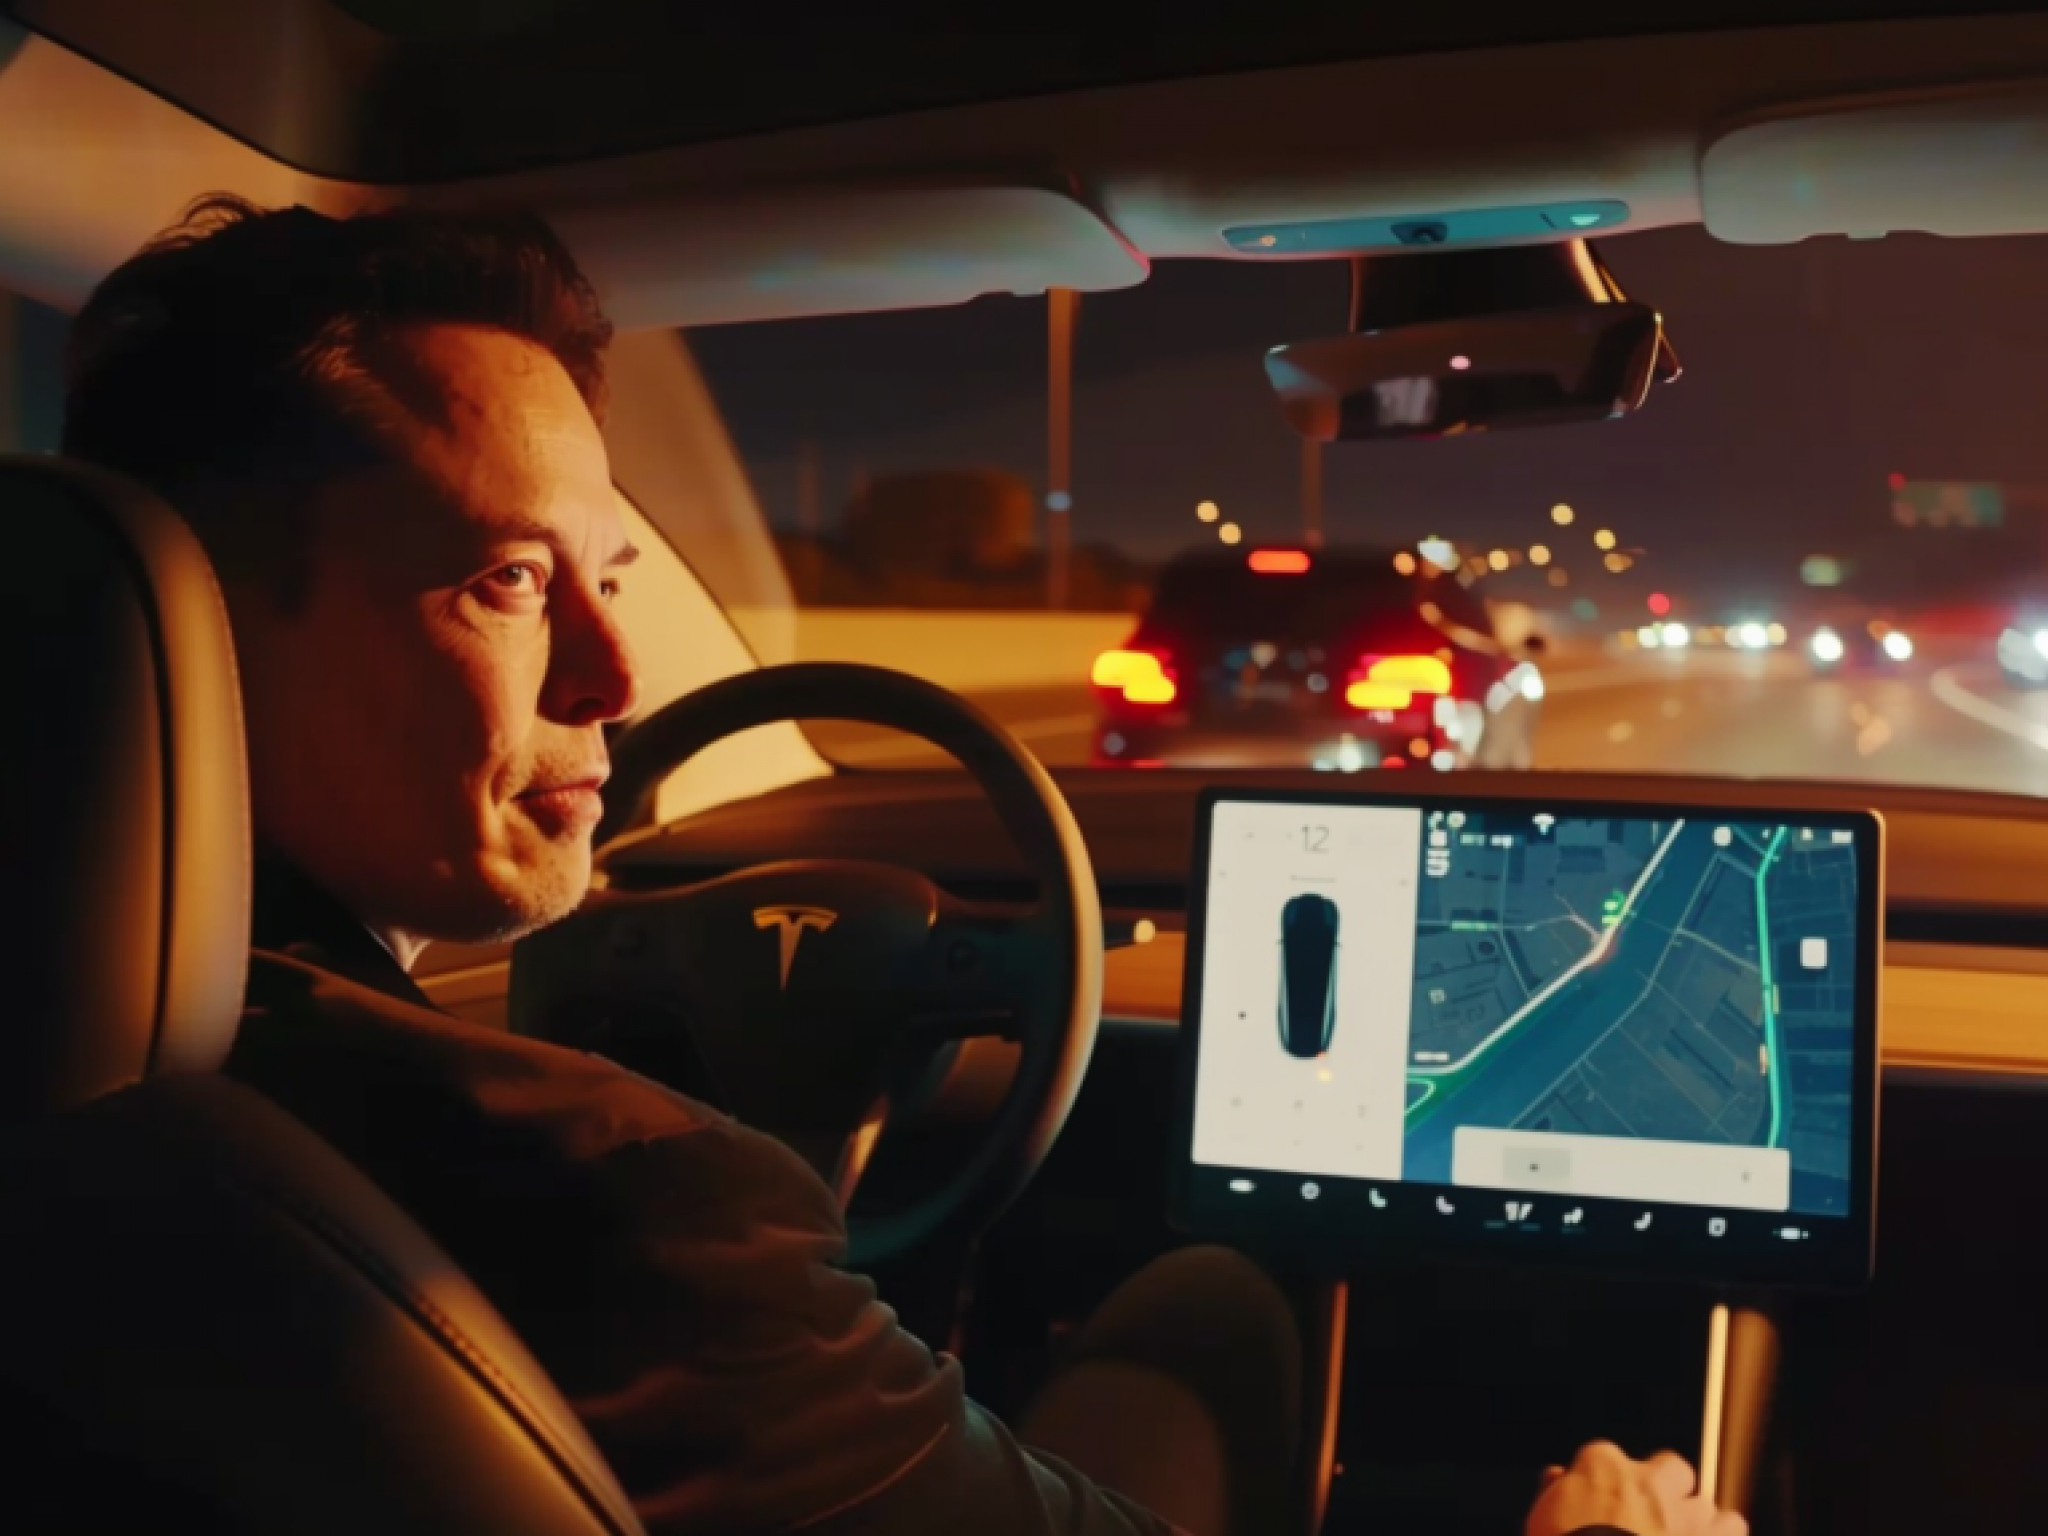  elon-musk-now-follows-uber-founder-on-x-foreshadowing-for-robotaxi-day-or-coincidence 